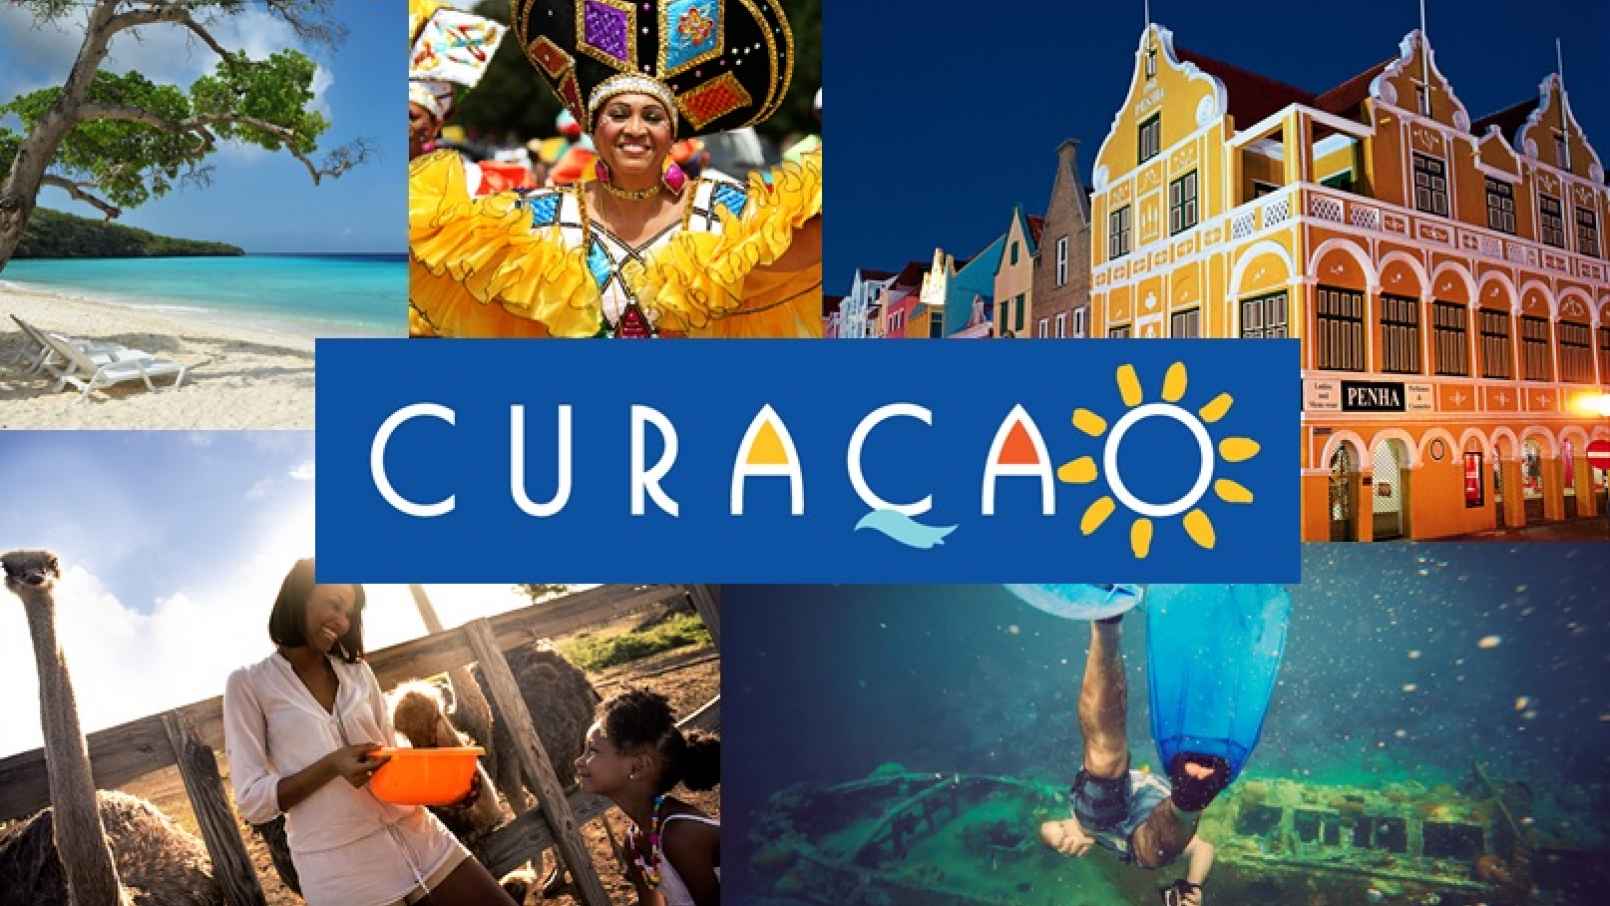 Curacao: Five Incredible Facts